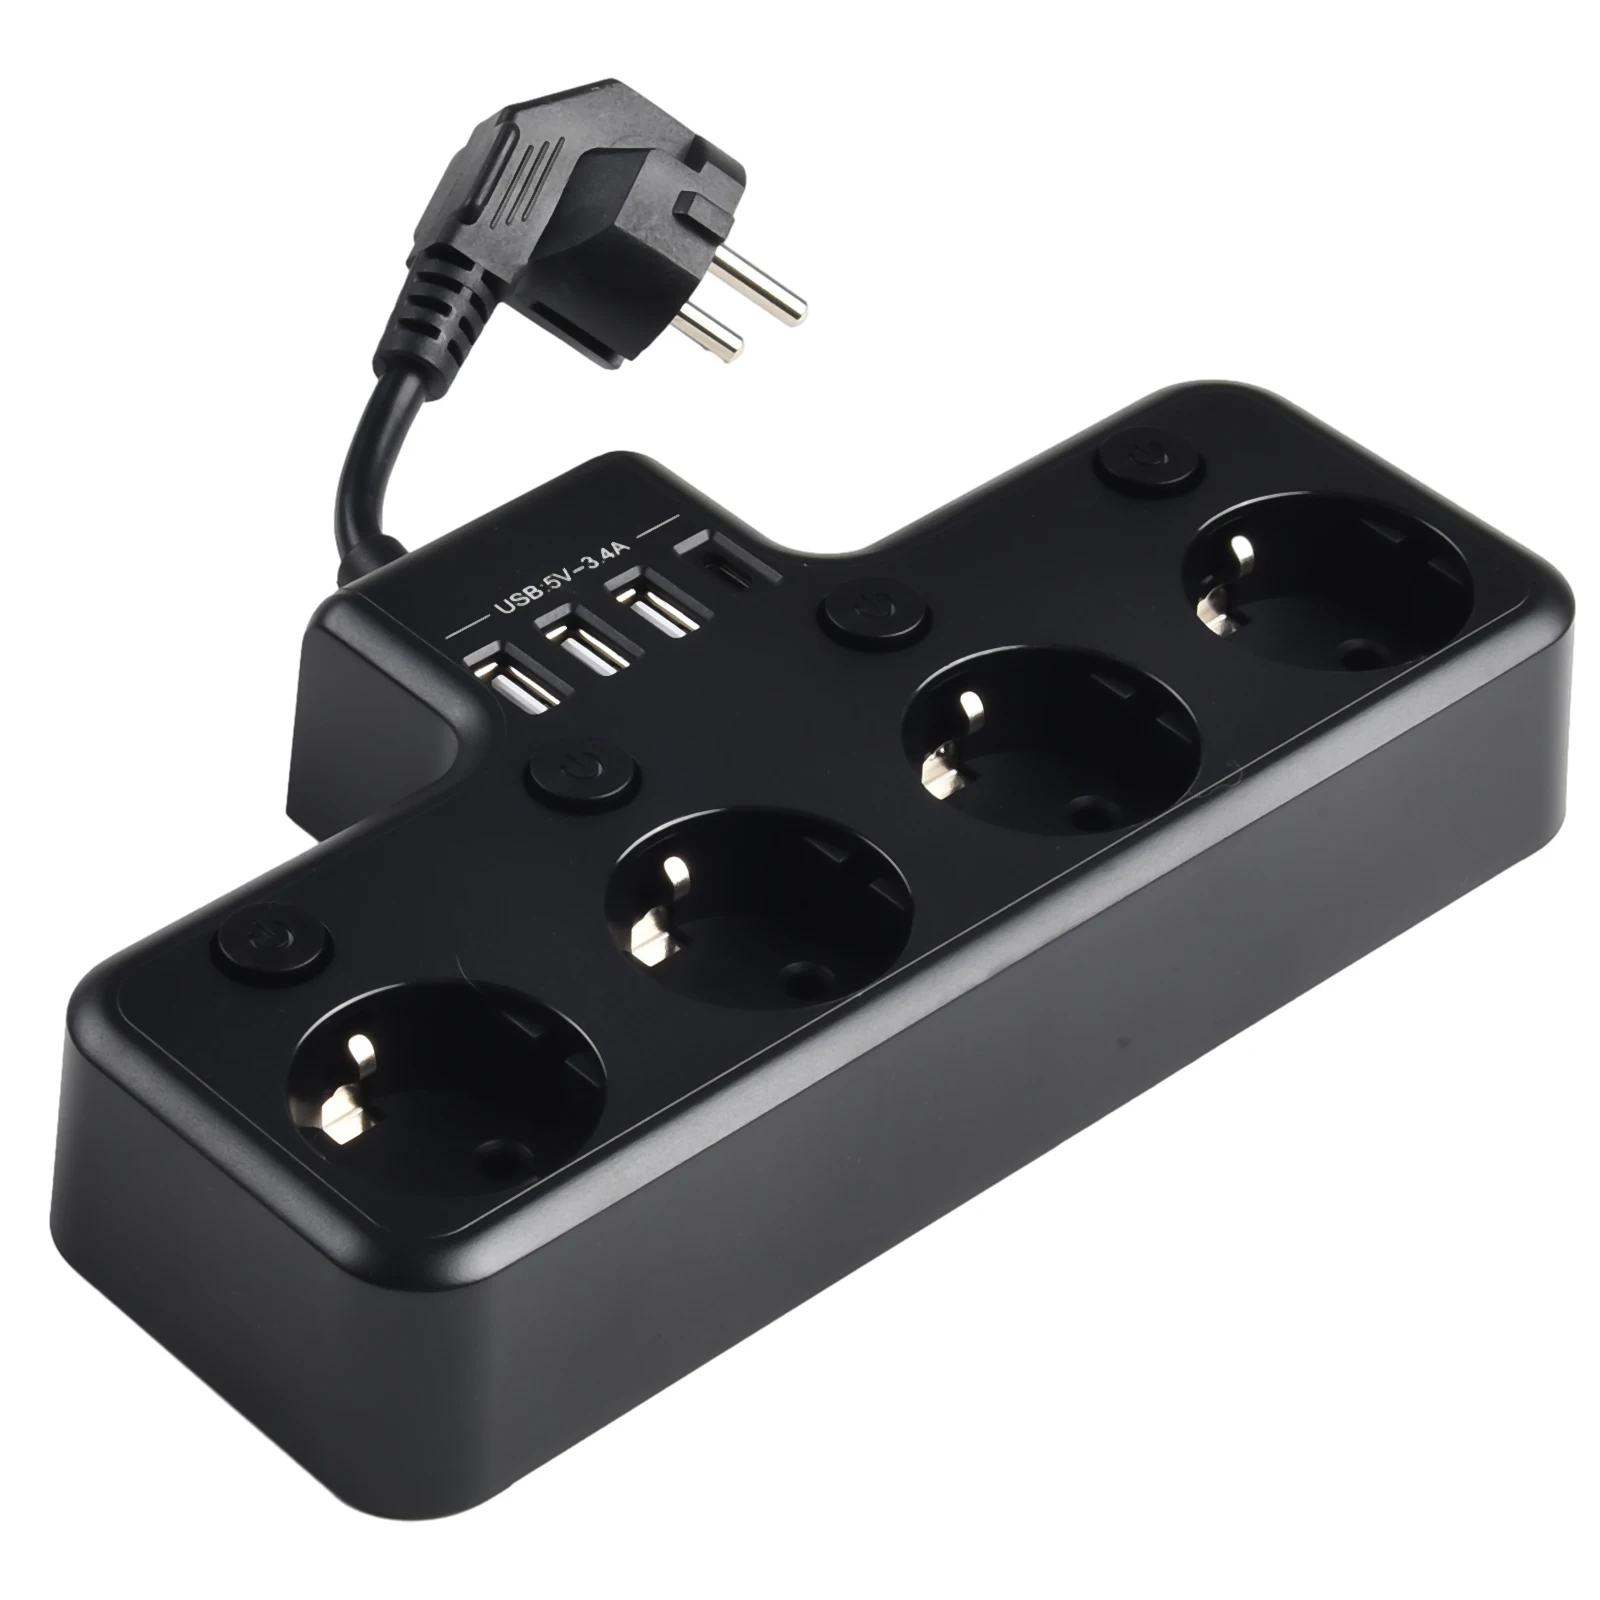 

Keep your Workspace Neat with this 4 Way Power Strip featuring Individual Switchable EU Sockets and Multiple USB Ports